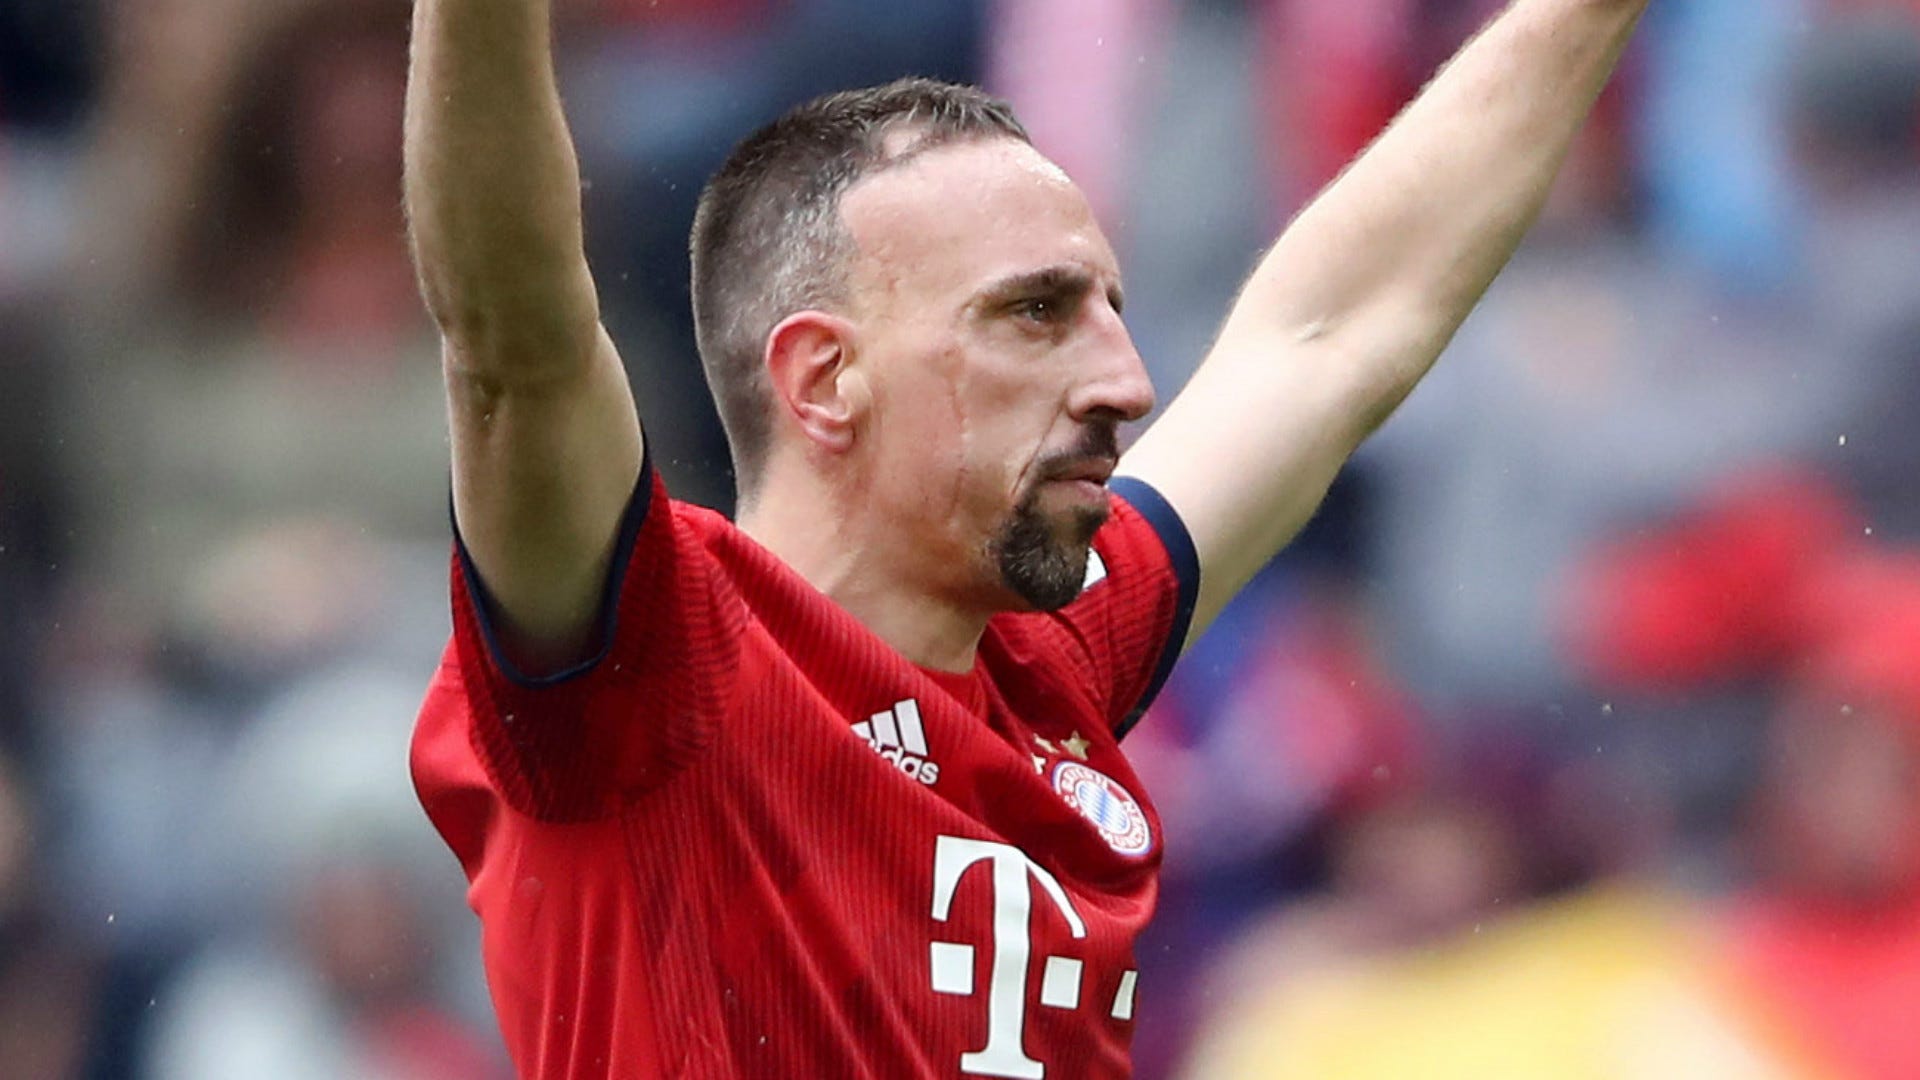 Bayern Munich transfer news: Franck Ribery to leave Allianz Arena at the end of the season | Goal.com